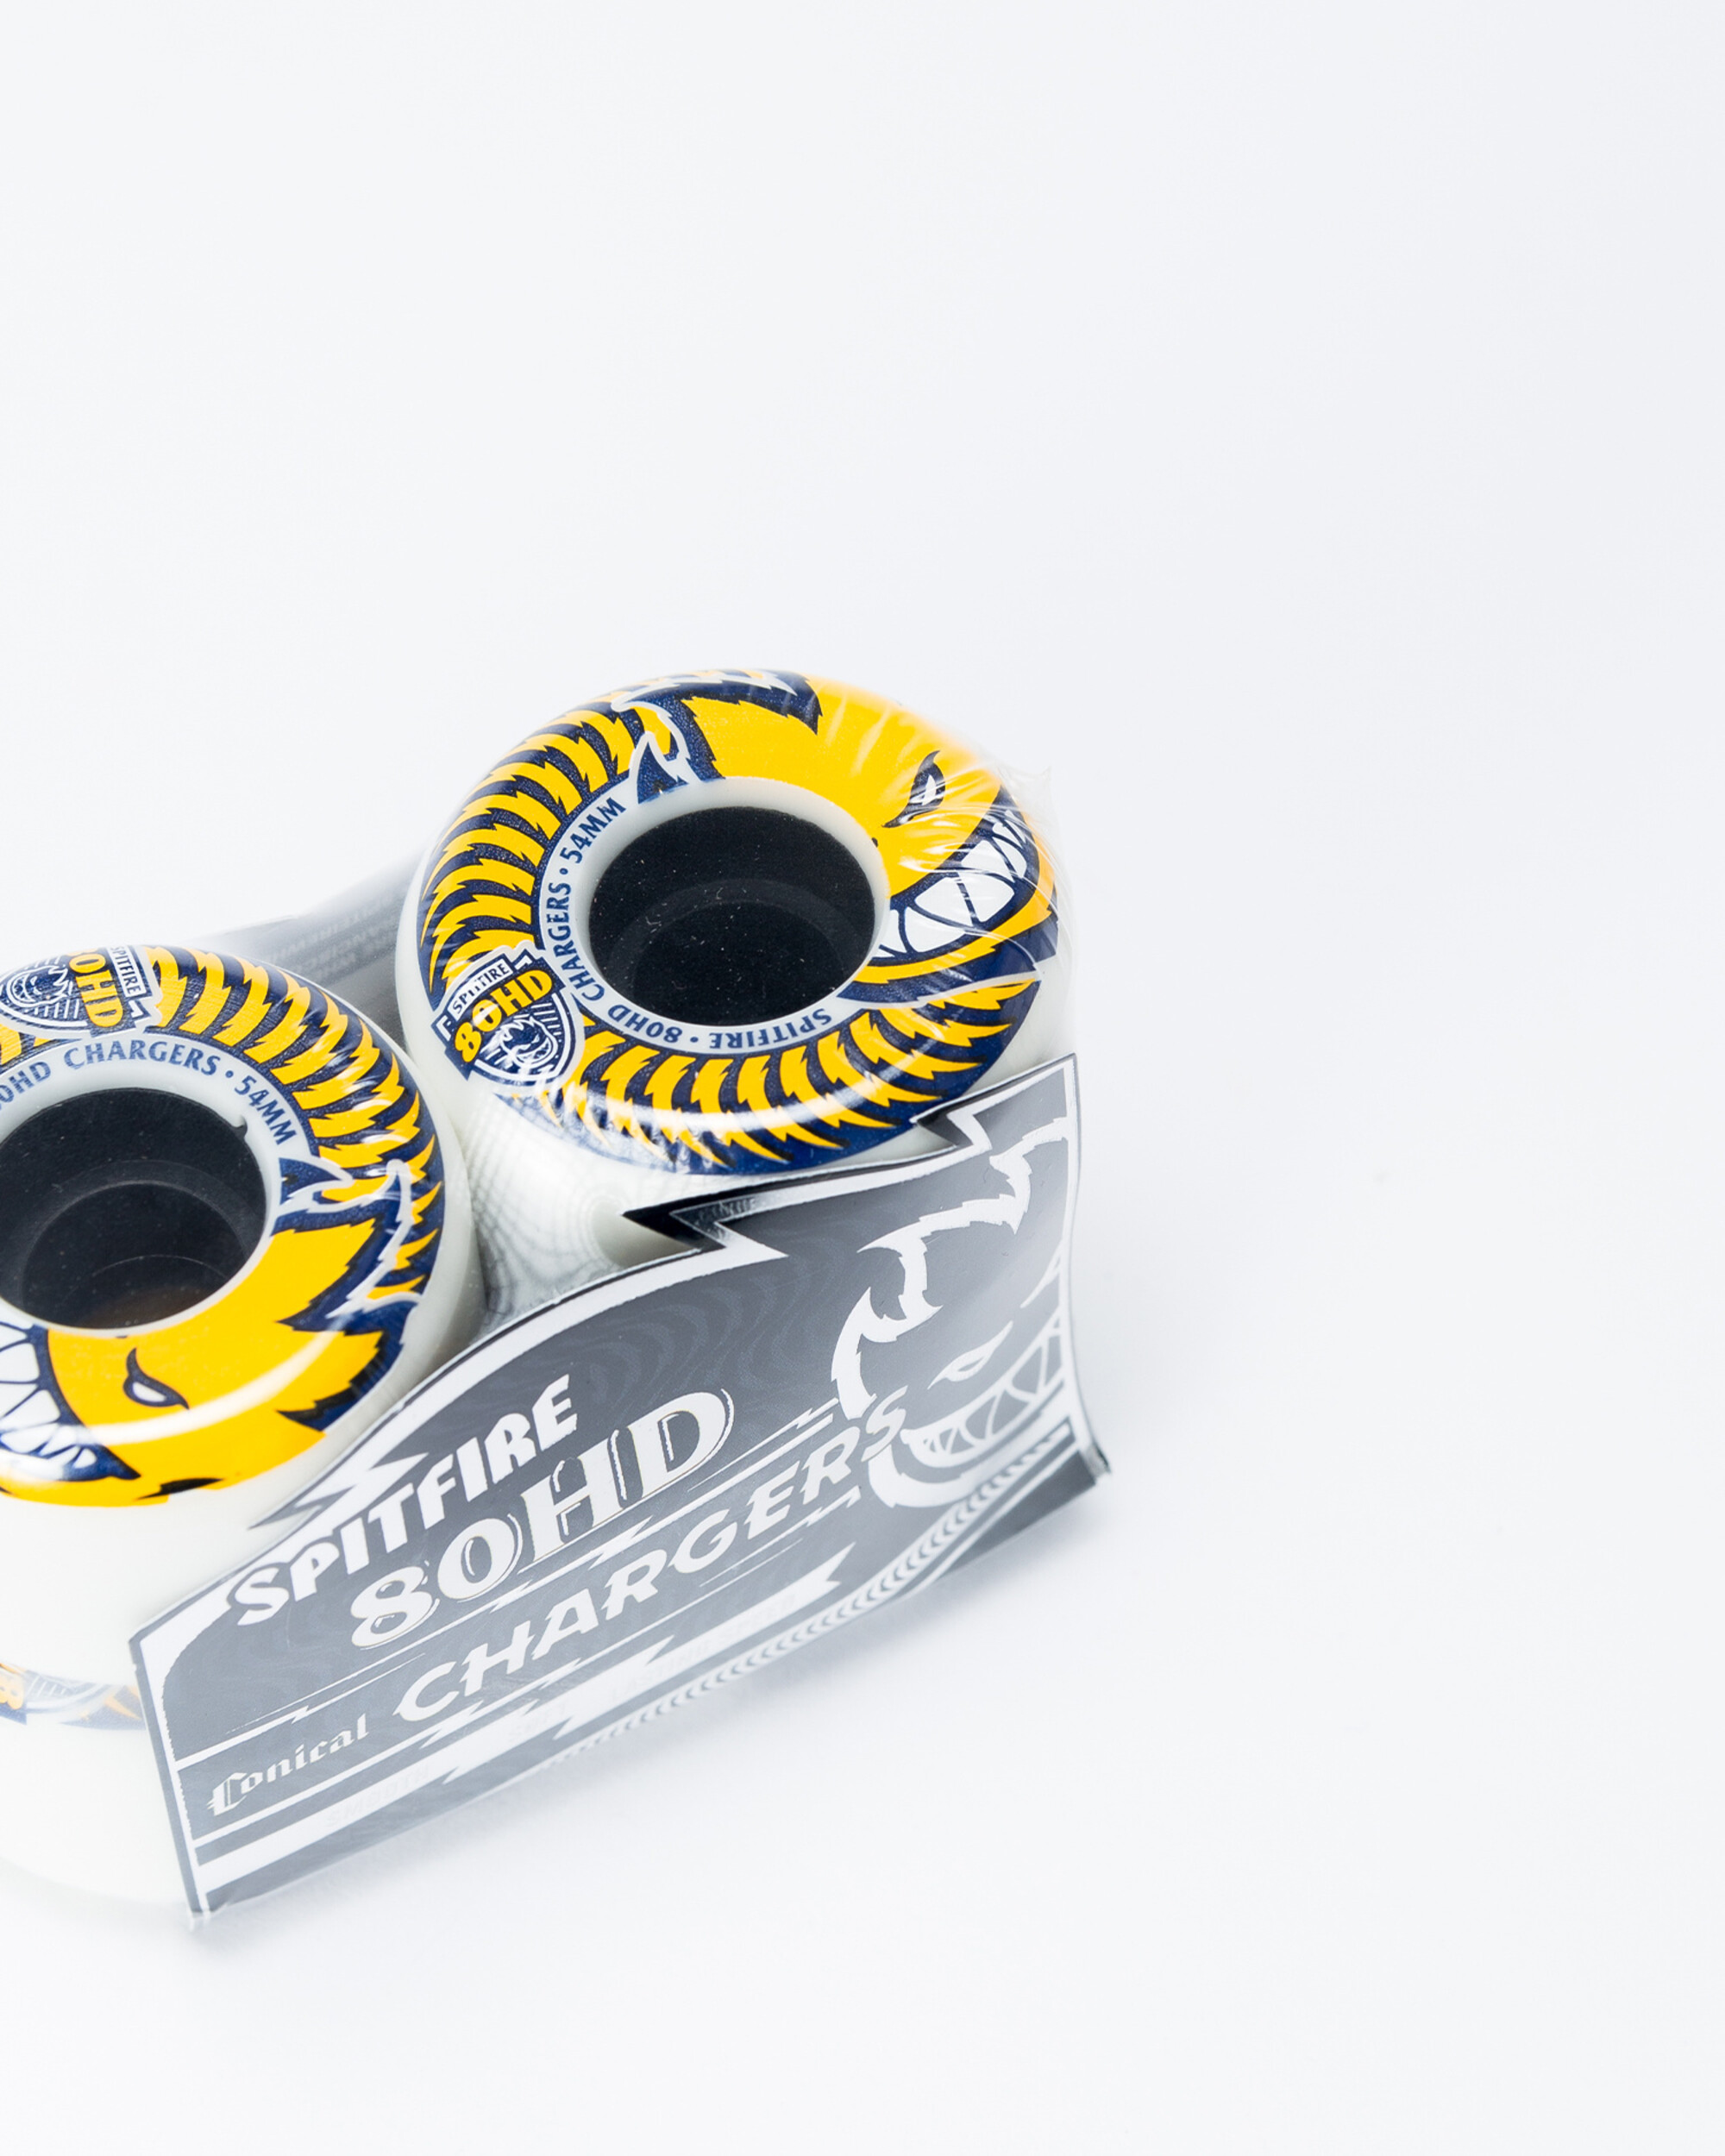 Spitfire Charger Whire yellow 54mm Wheels